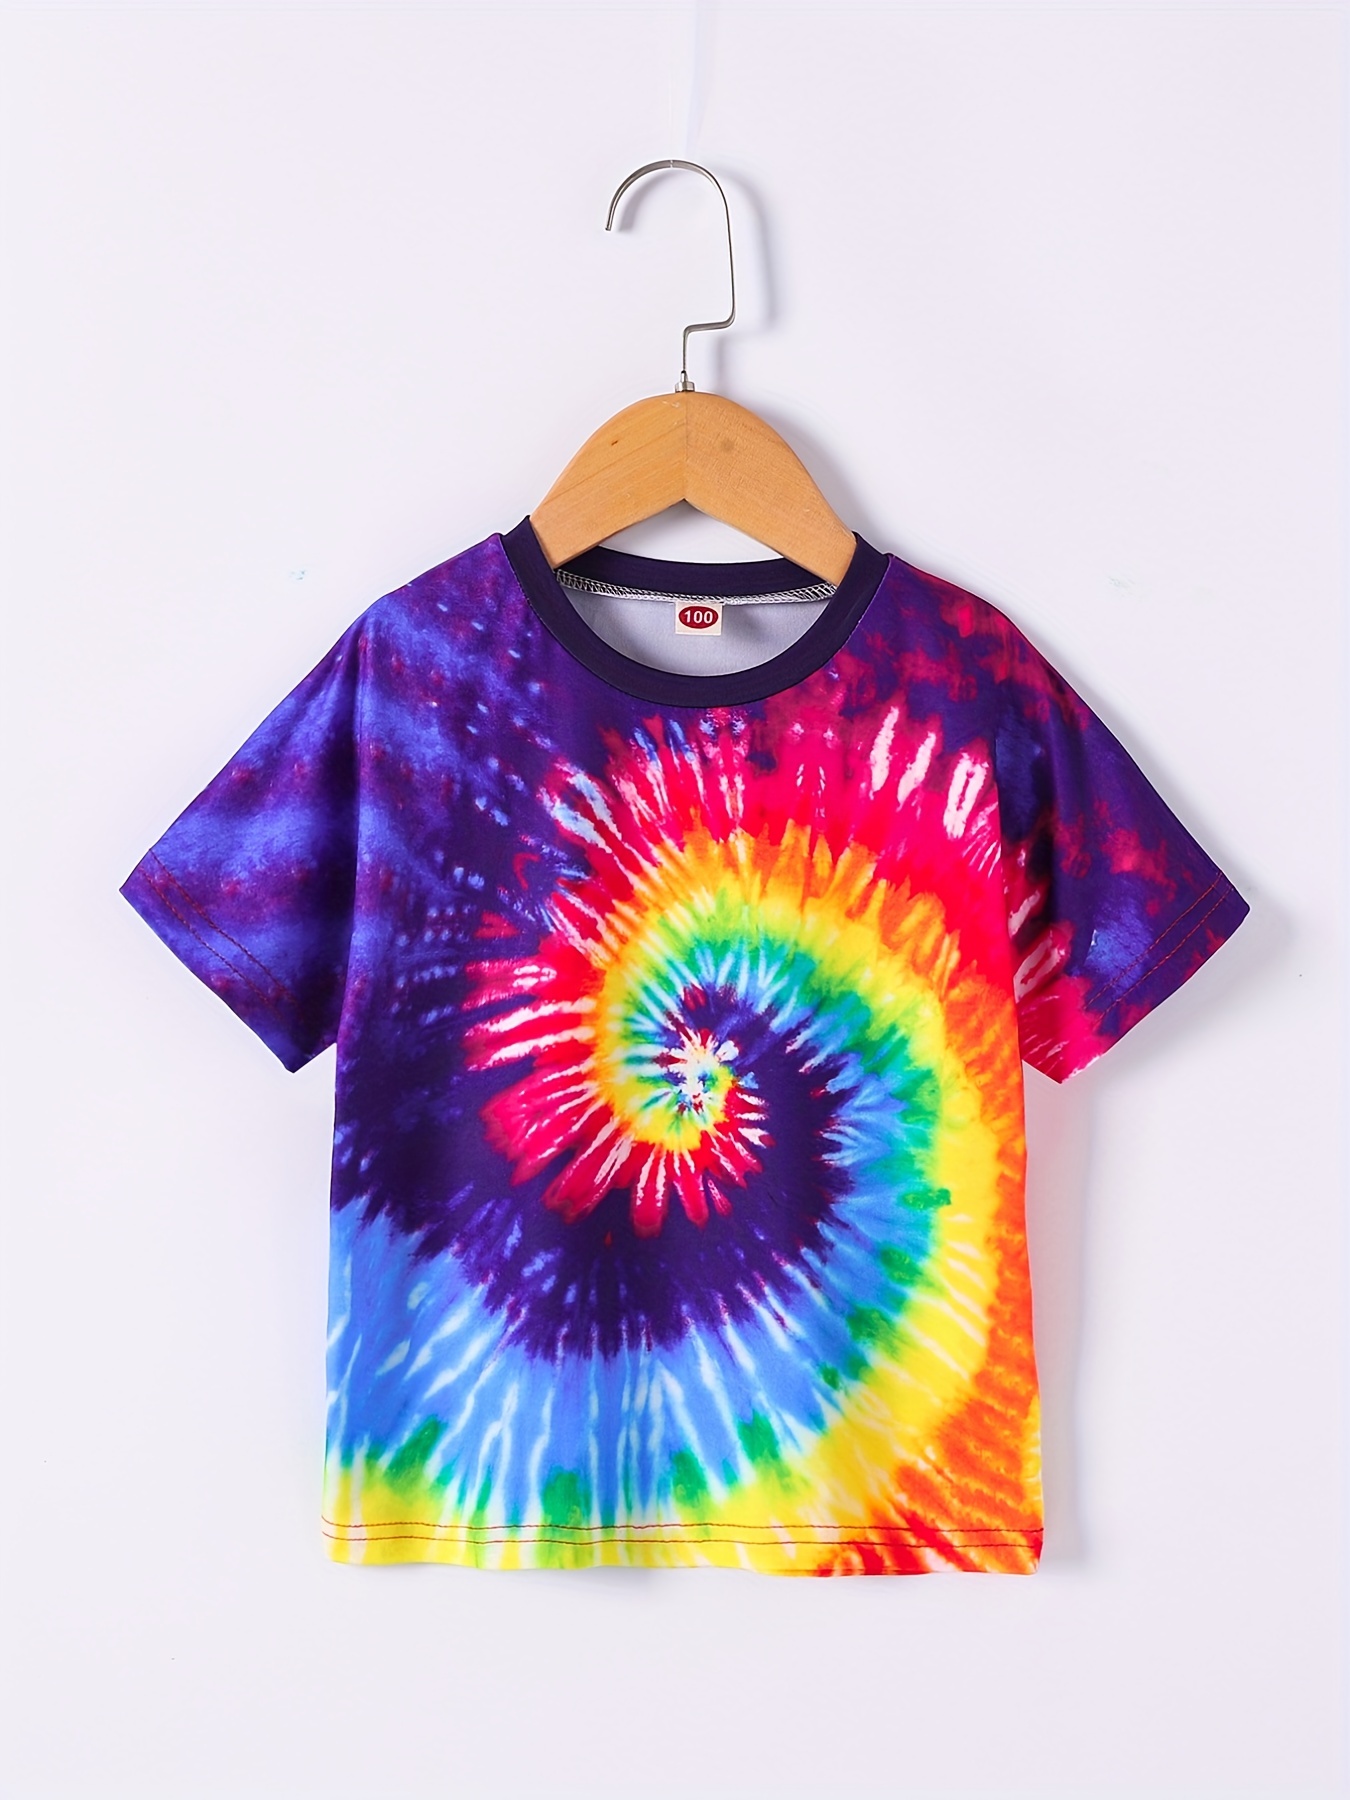 32 Best Shirts for Tie Dye (and Other Cotton Items) - Cool Kids Crafts